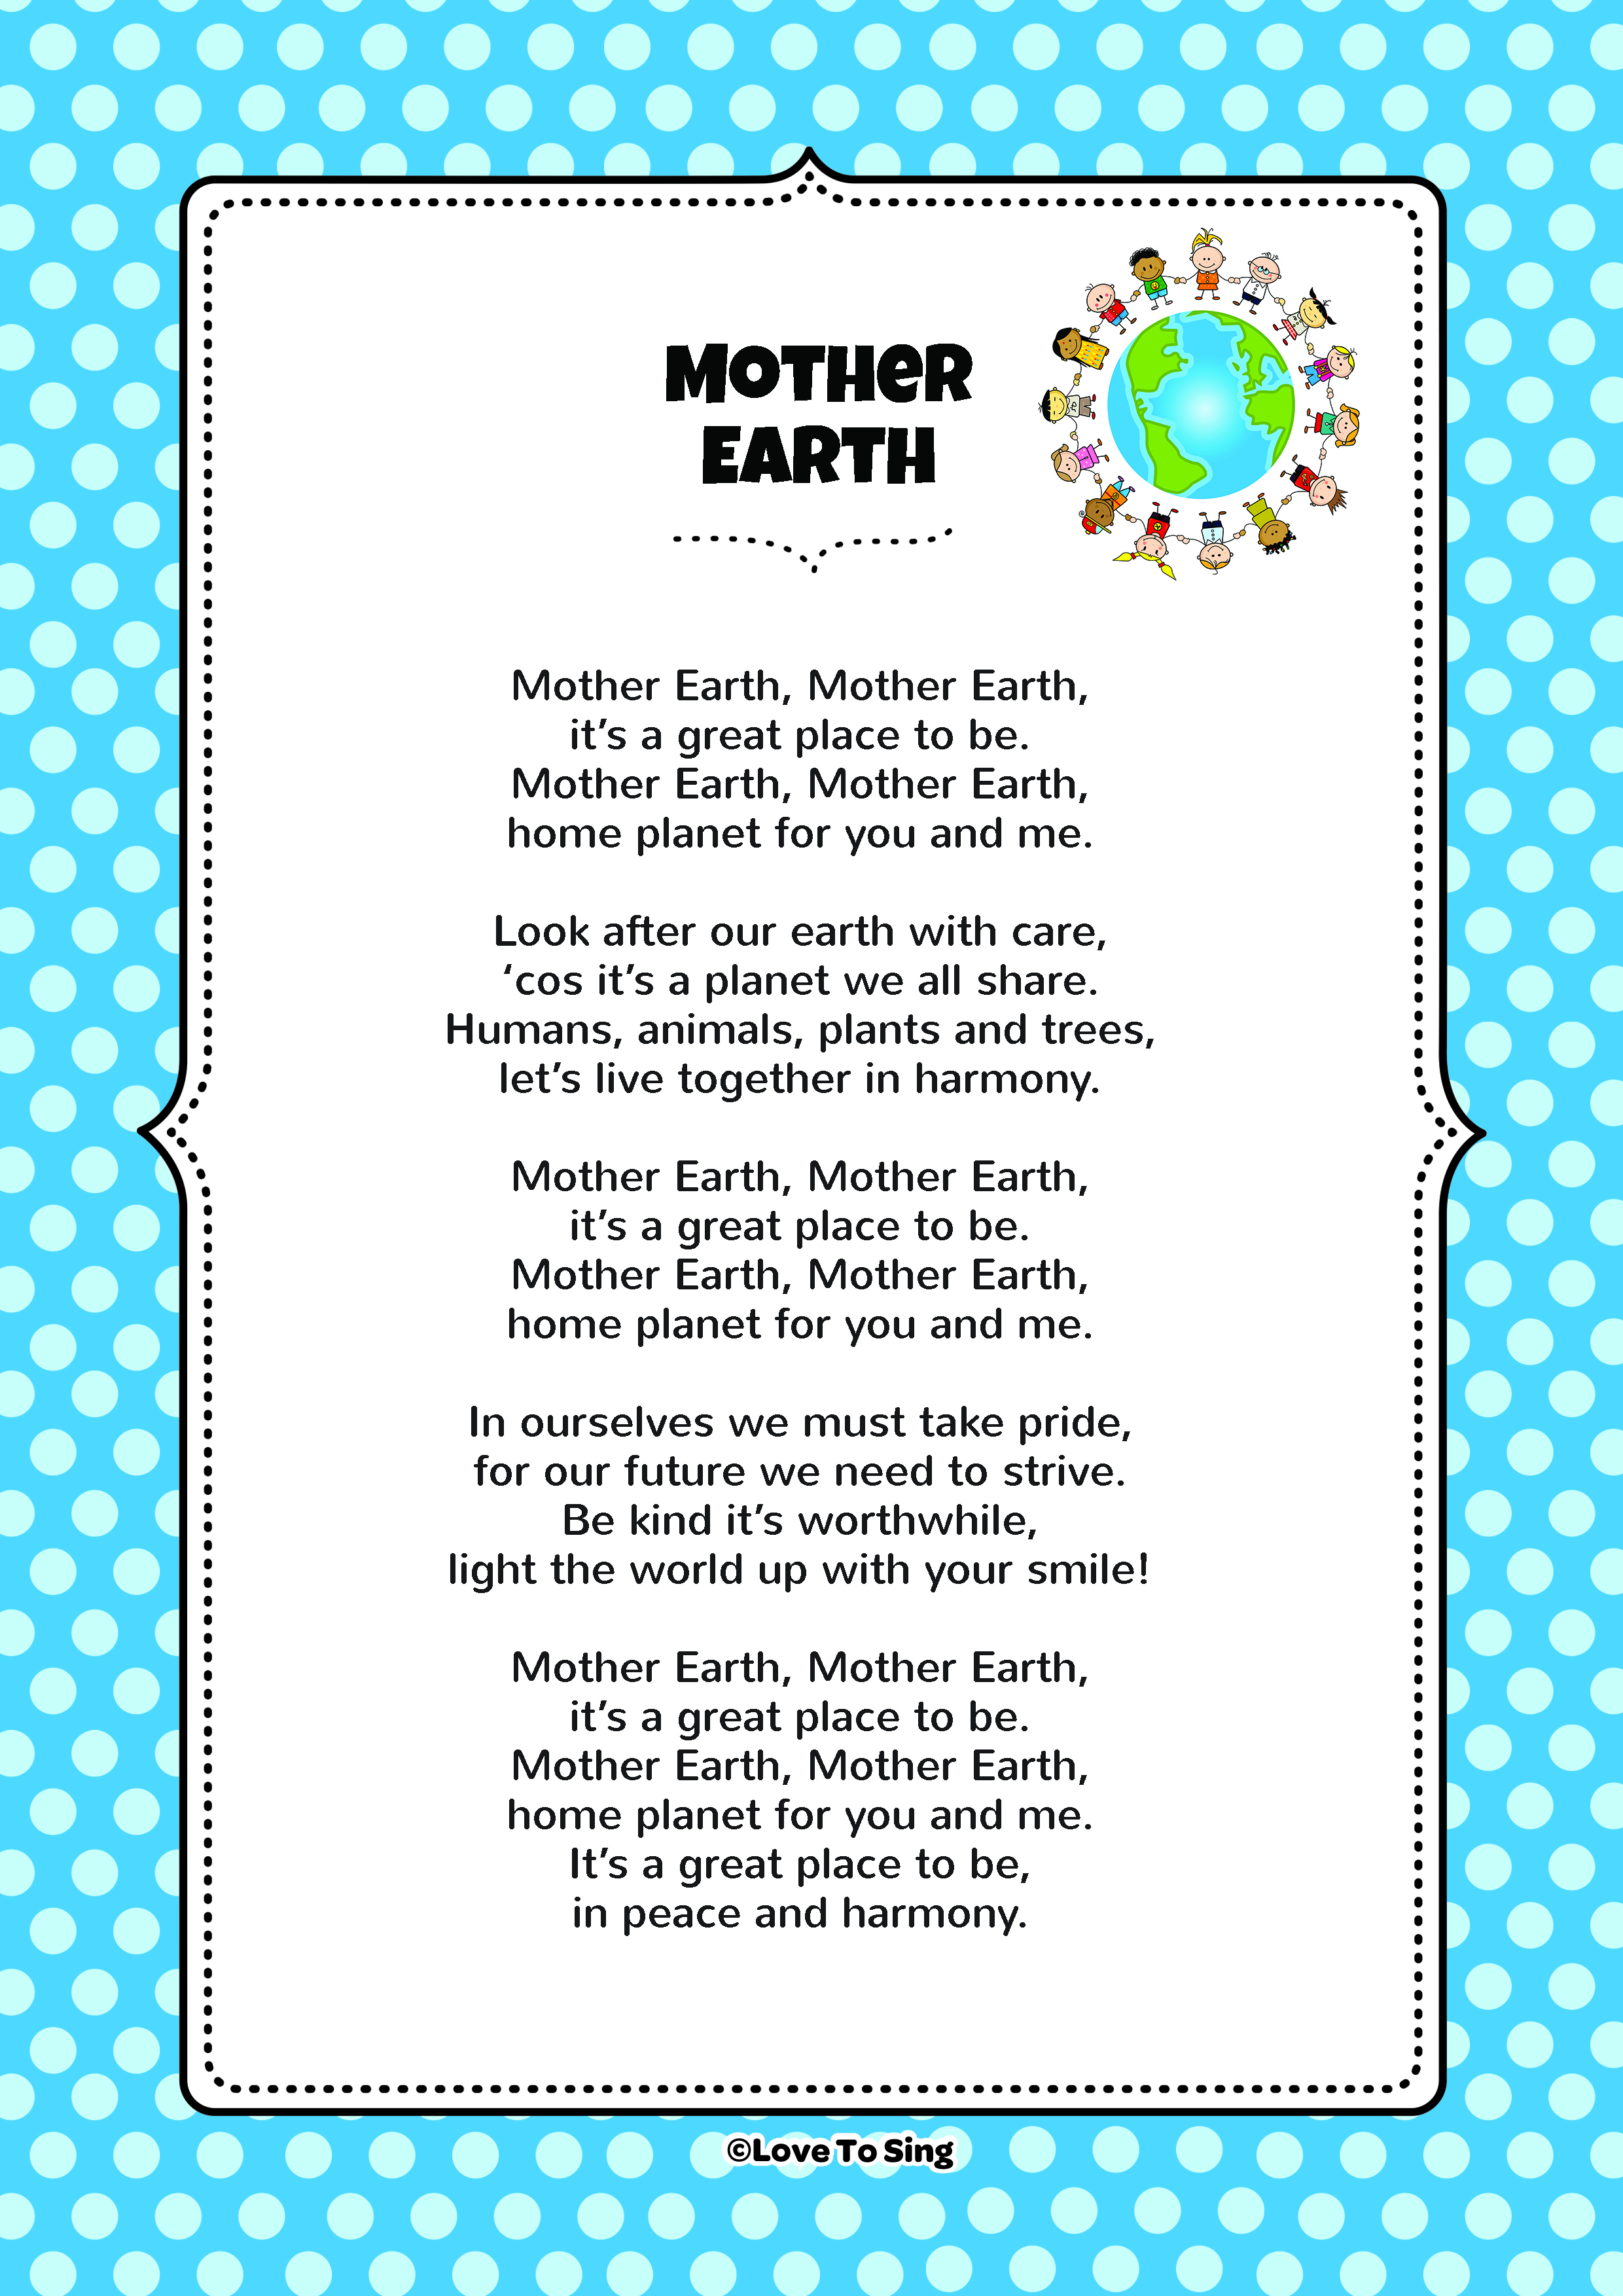 mother-earth-kids-video-song-with-free-lyrics-activities